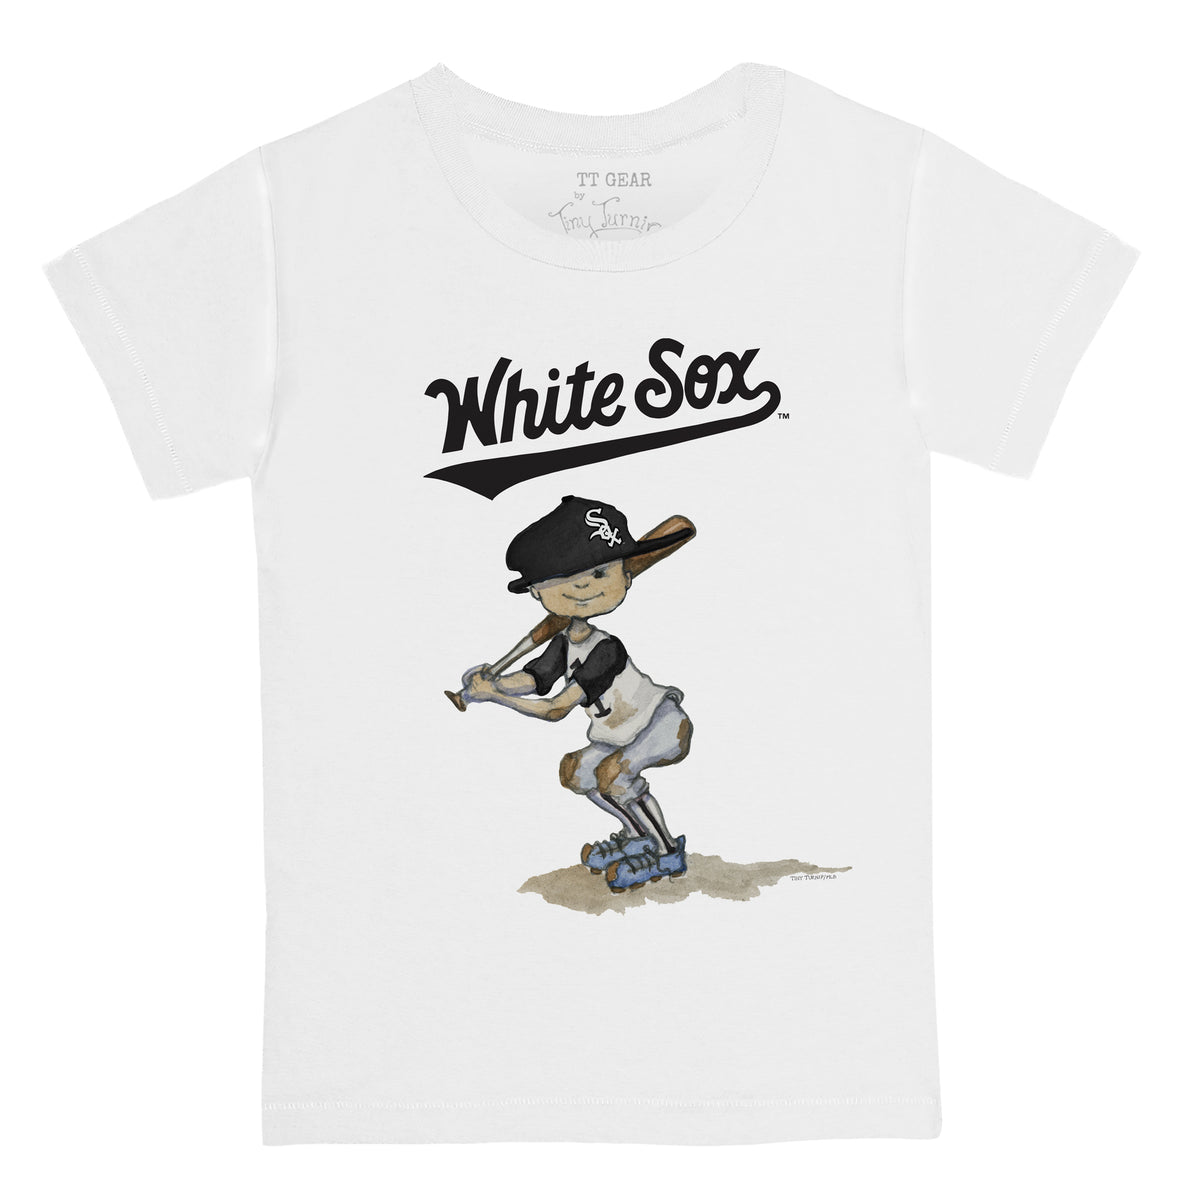 Chicago White Sox Apparel, White Sox Jersey, White Sox Clothing